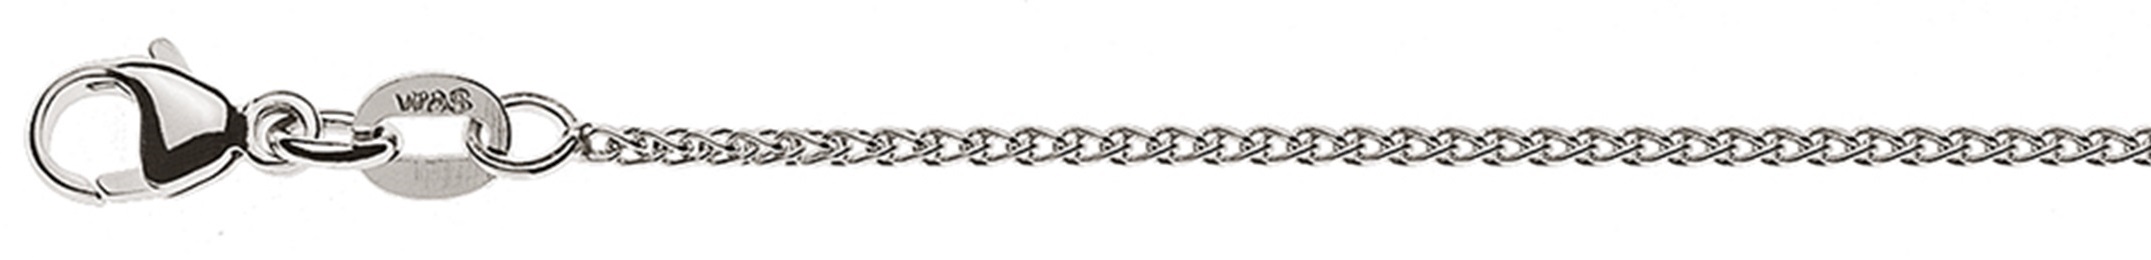 AURONOS Style Necklace white gold 9K cable chain 55cm 1.2mm